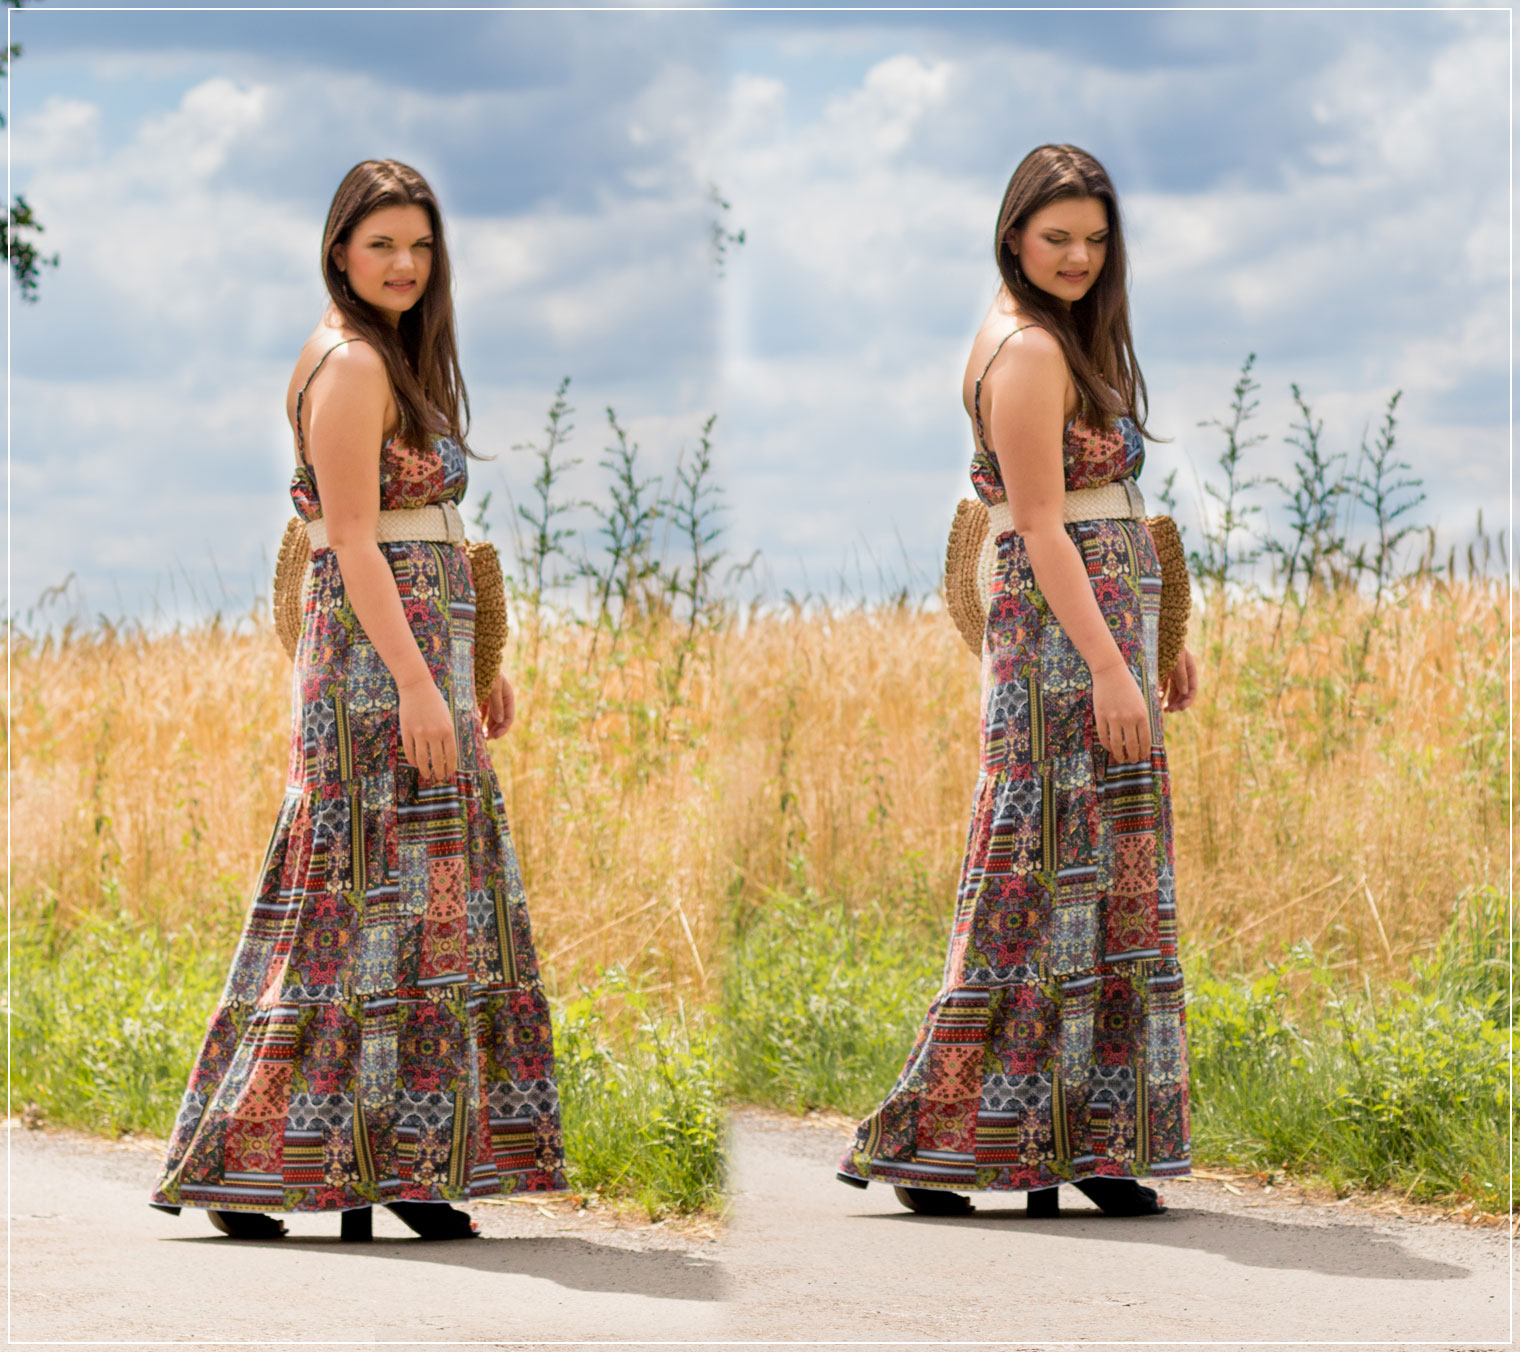 Boho-Style, Sommerlook, Maxikleid, Sommeroutfit, Boho-Look, Styleguide, Outfitinspiration, Modebloggerin, Fashionbloggerin, Modeblog, Ruhrgebiet